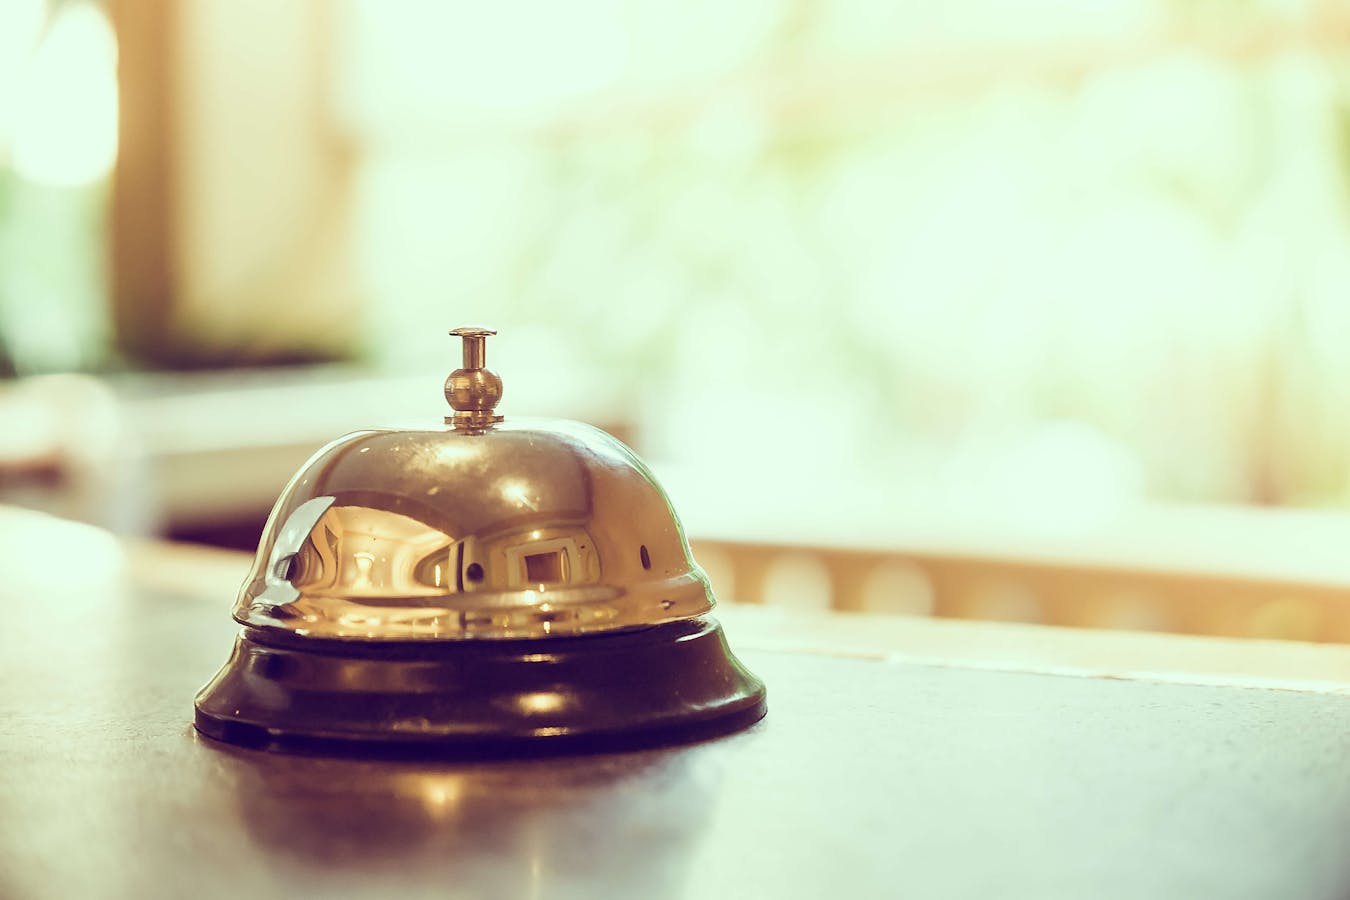 Do you manage a small hotel? Here's why you should consider revenue management